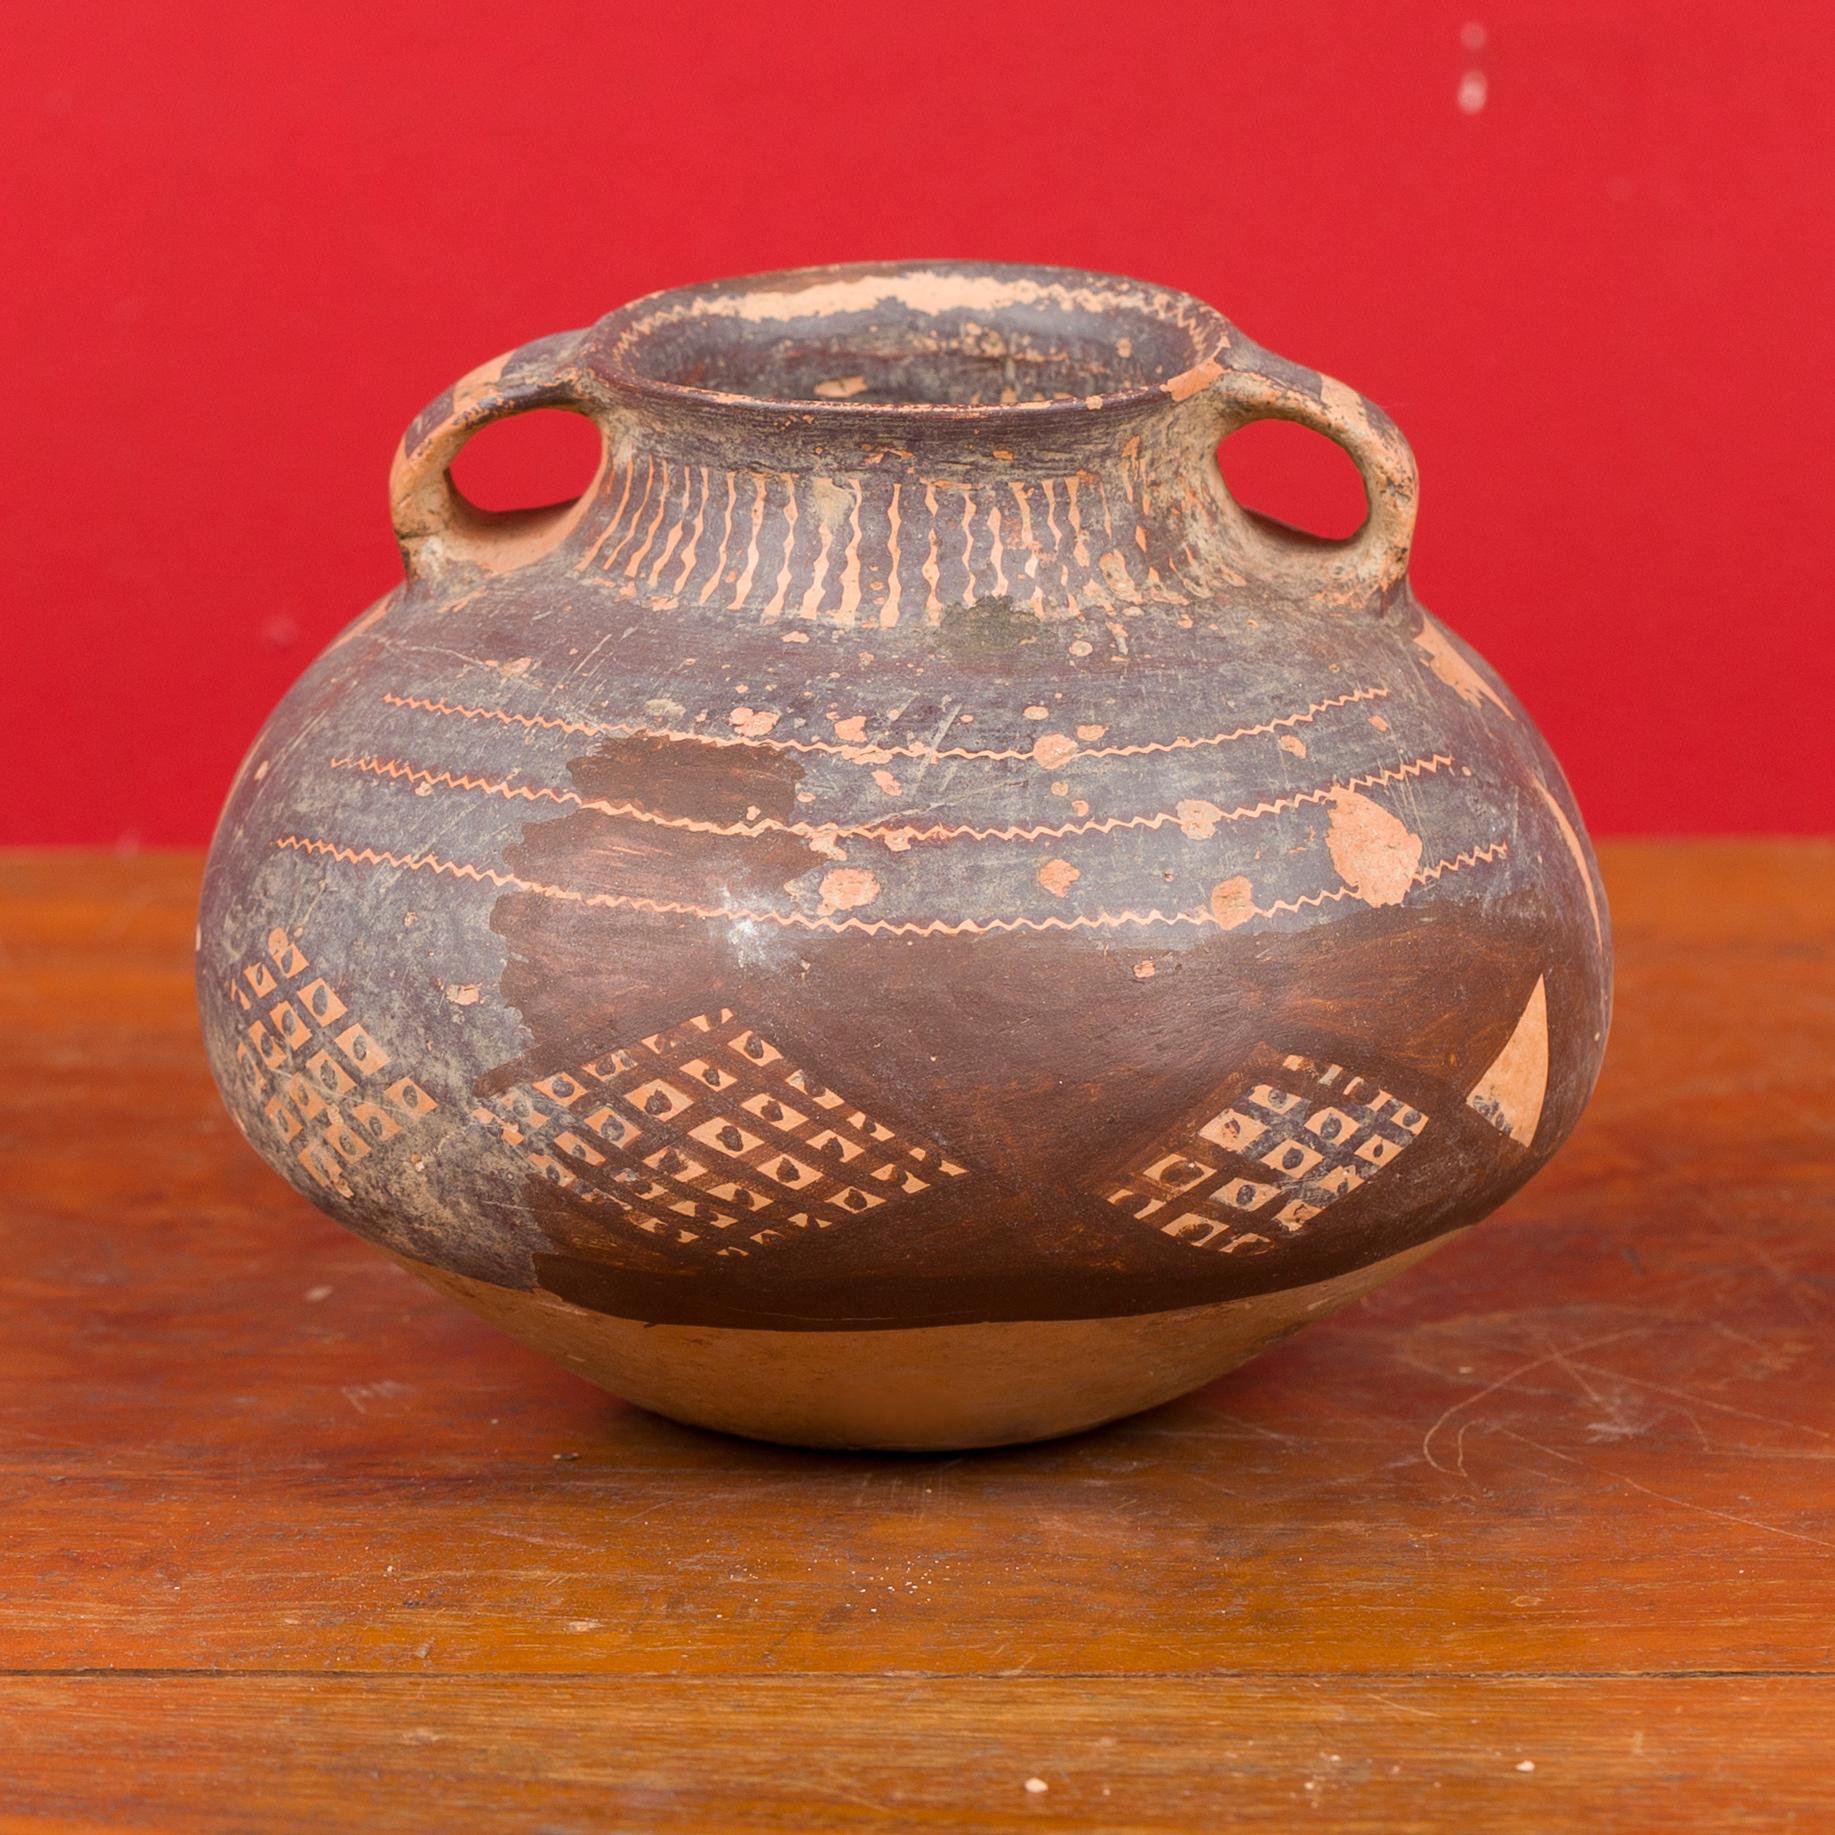 A Chinese Neolithic terracotta pottery from 4000-3000 BC, with lateral handles and brown painted geometric décor. Born in China during the Neolithic period, this pitcher attracts our attention with its nice patina, simple lines and geometric motifs.